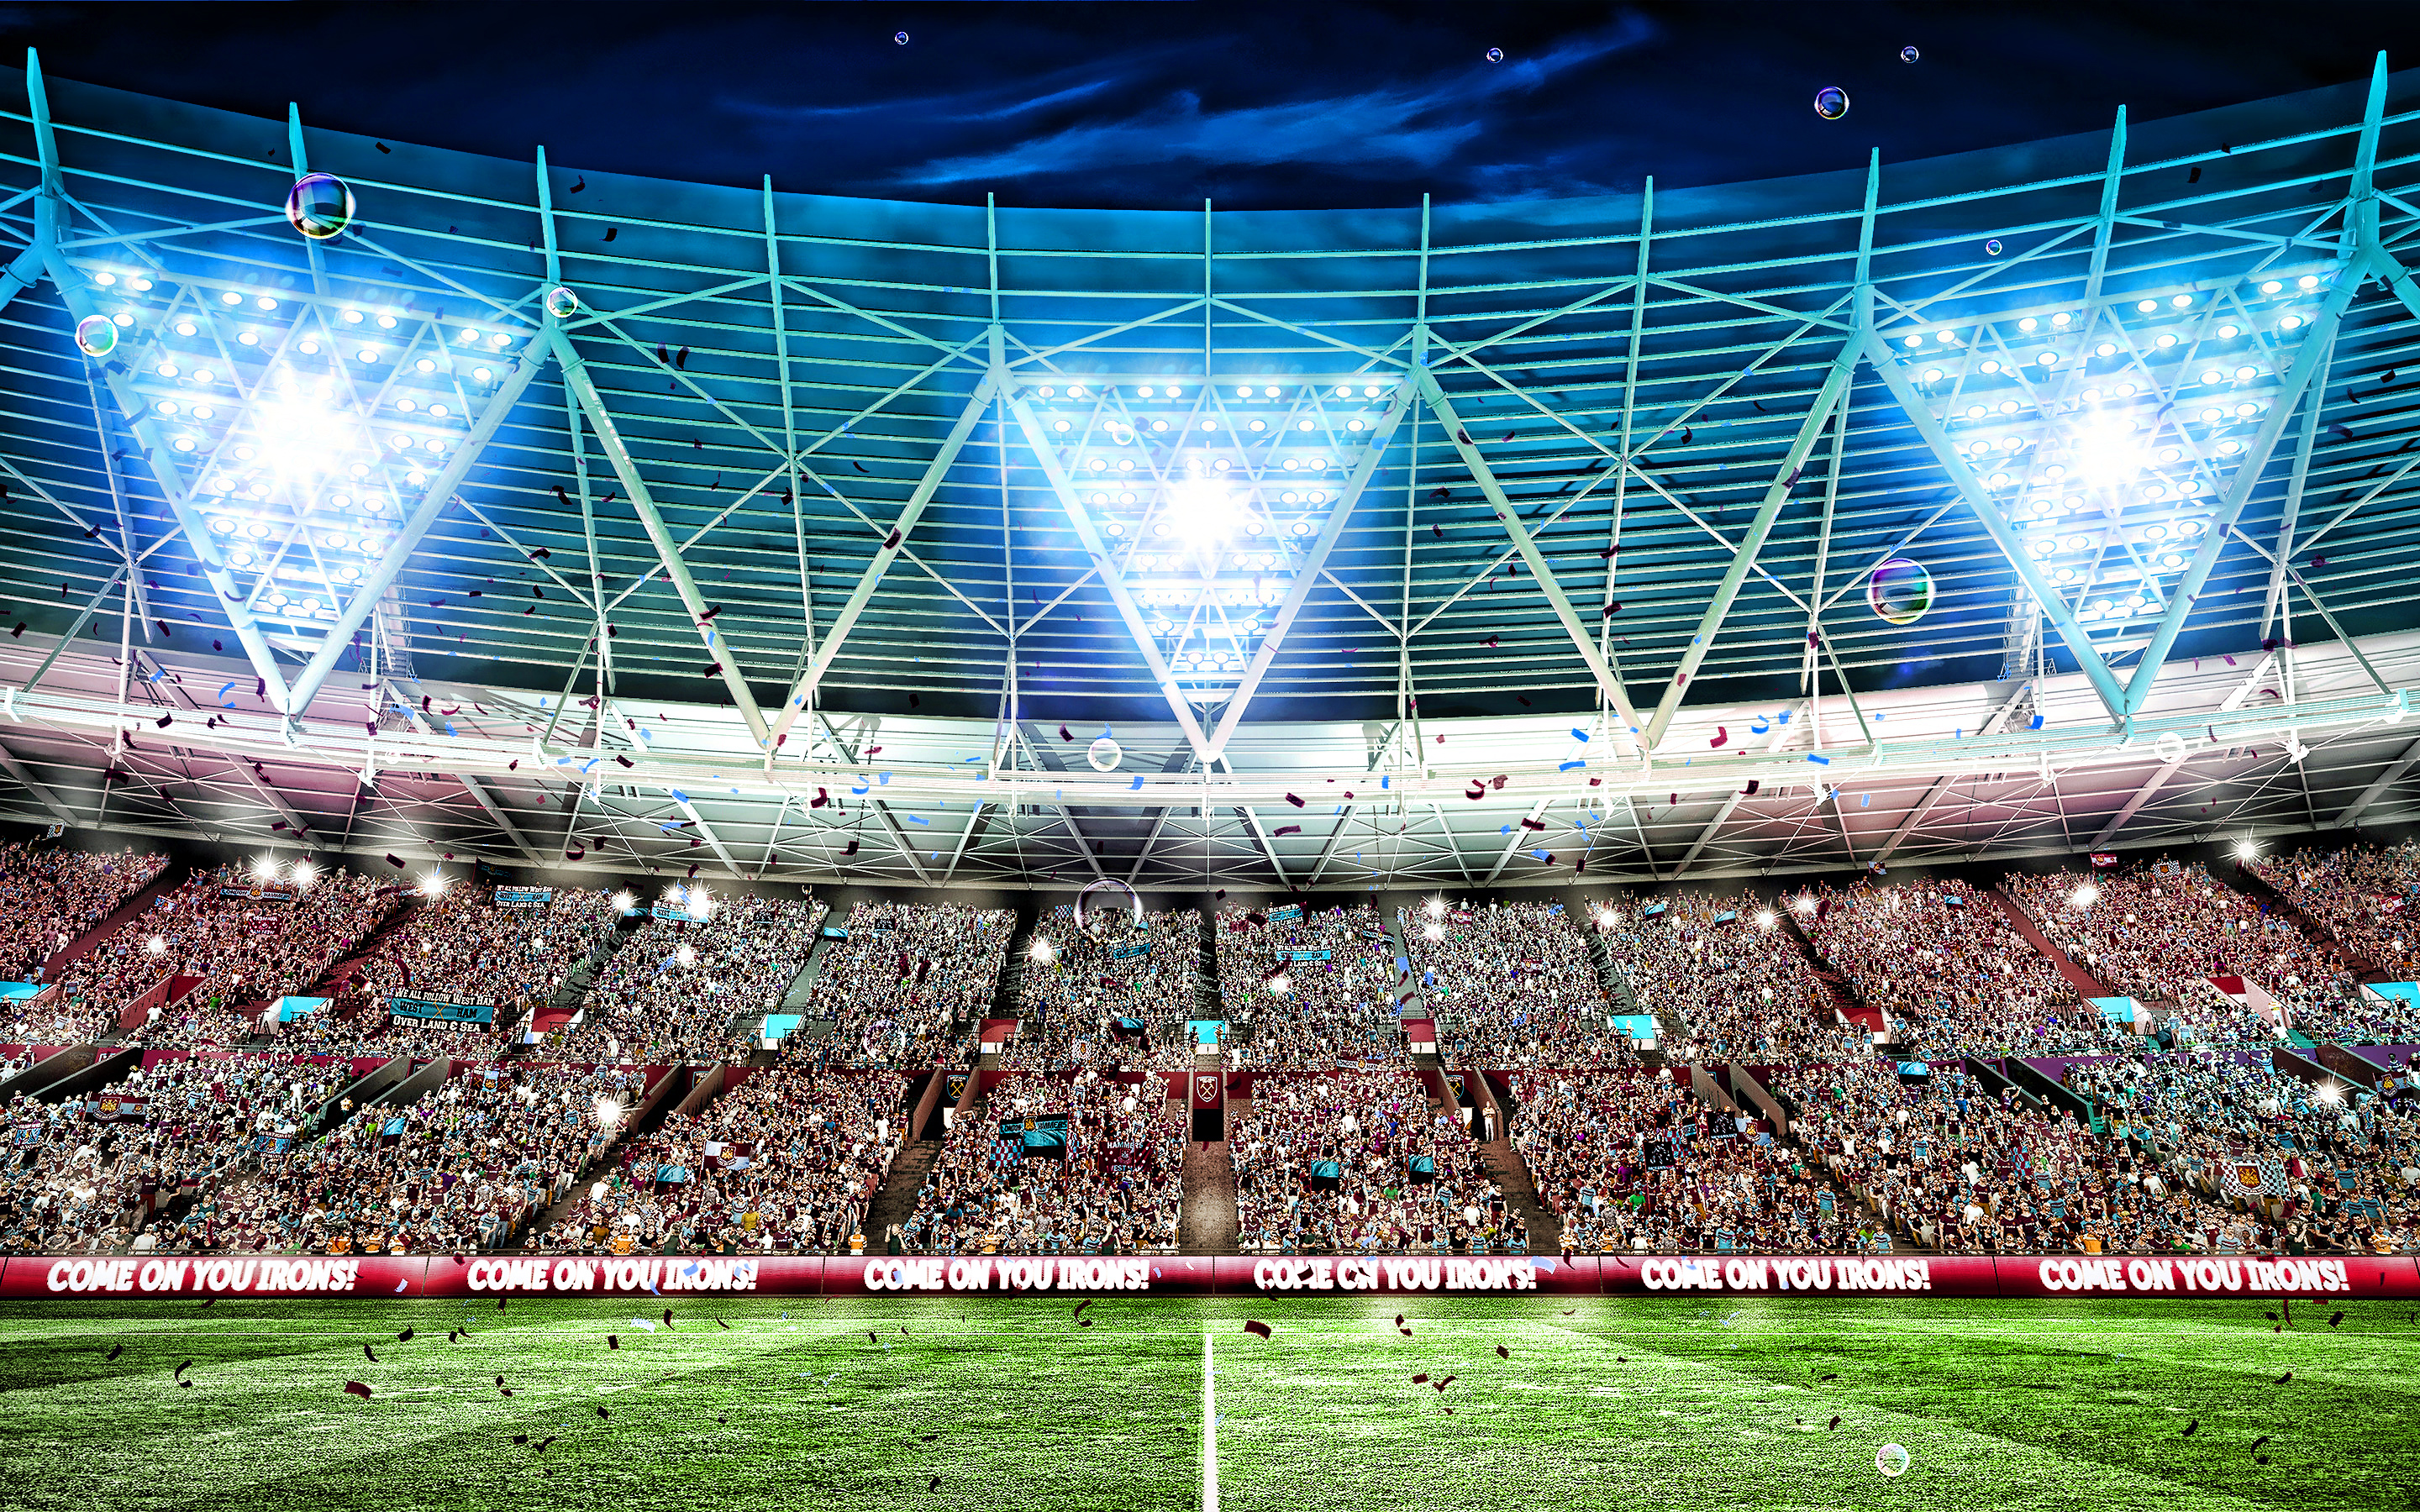 Download wallpaper West Ham Stadium, London Stadium, London, England, soccer, football stadium, West Ham United FC, english stadium for desktop with resolution 2880x1800. High Quality HD picture wallpaper